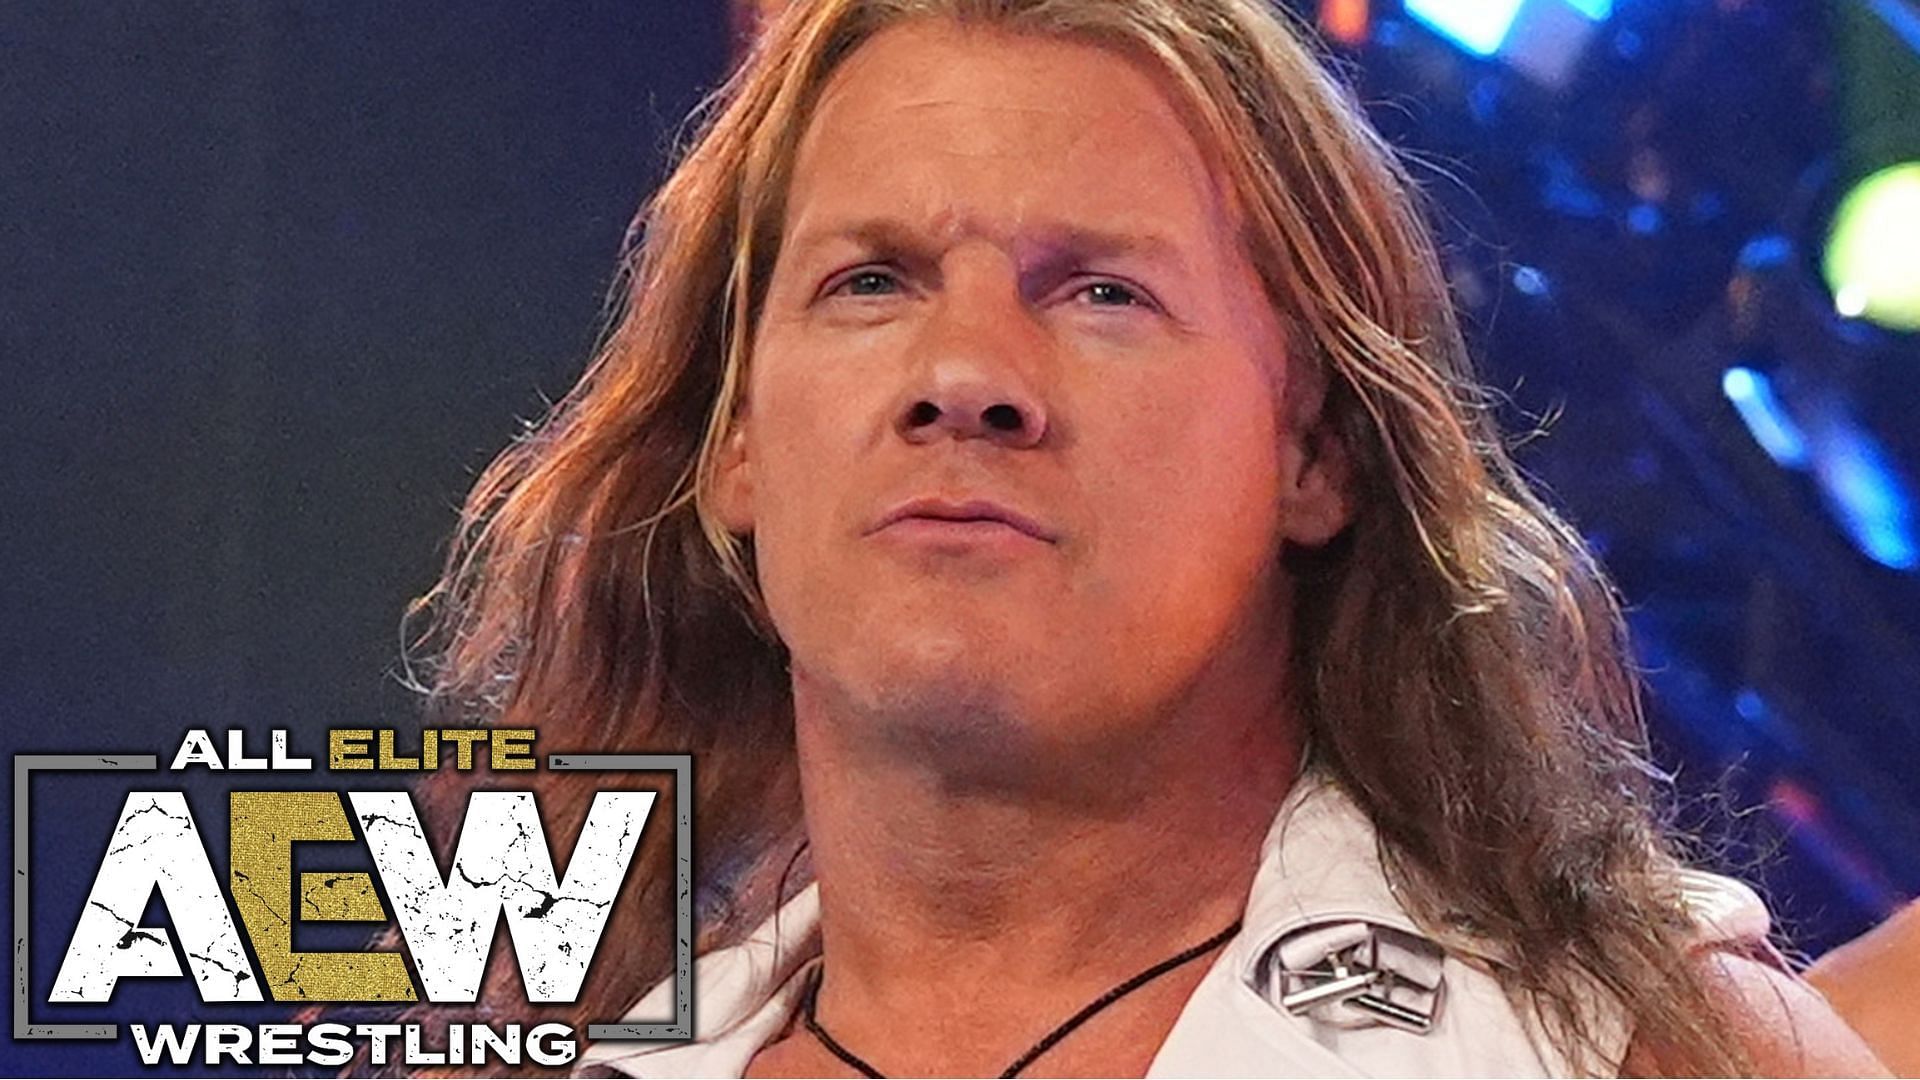 Chris Jericho is one of the most prominent stars in AEW.